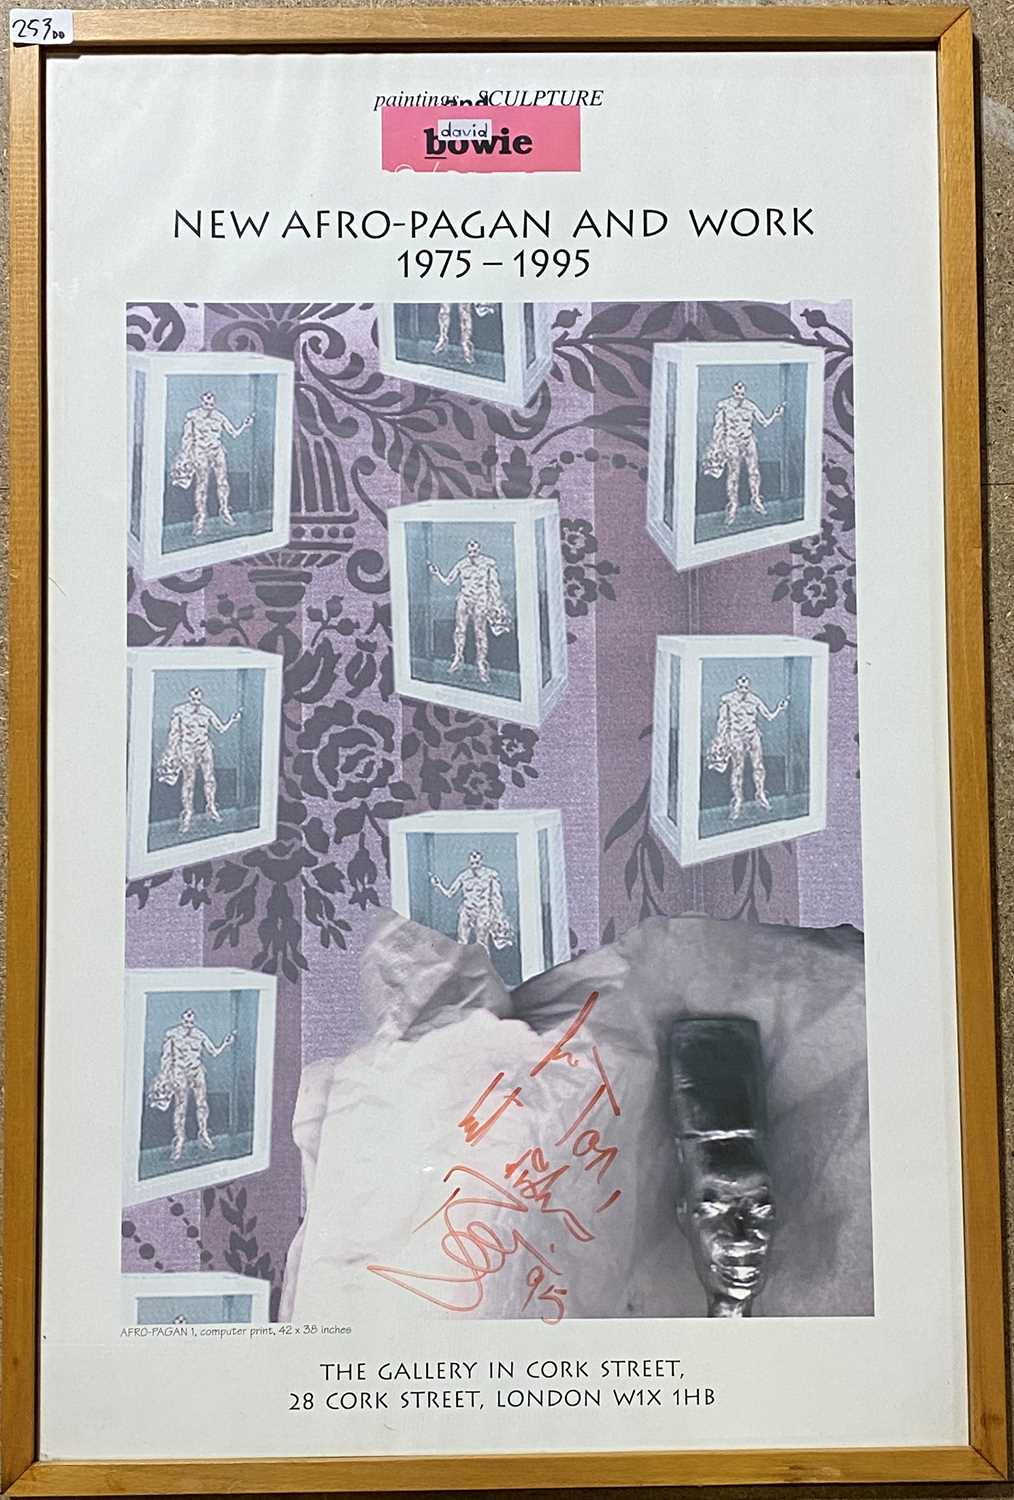 Lot 253 - DAVID BOWIE 1995 EXHIBITION POSTER SIGNED